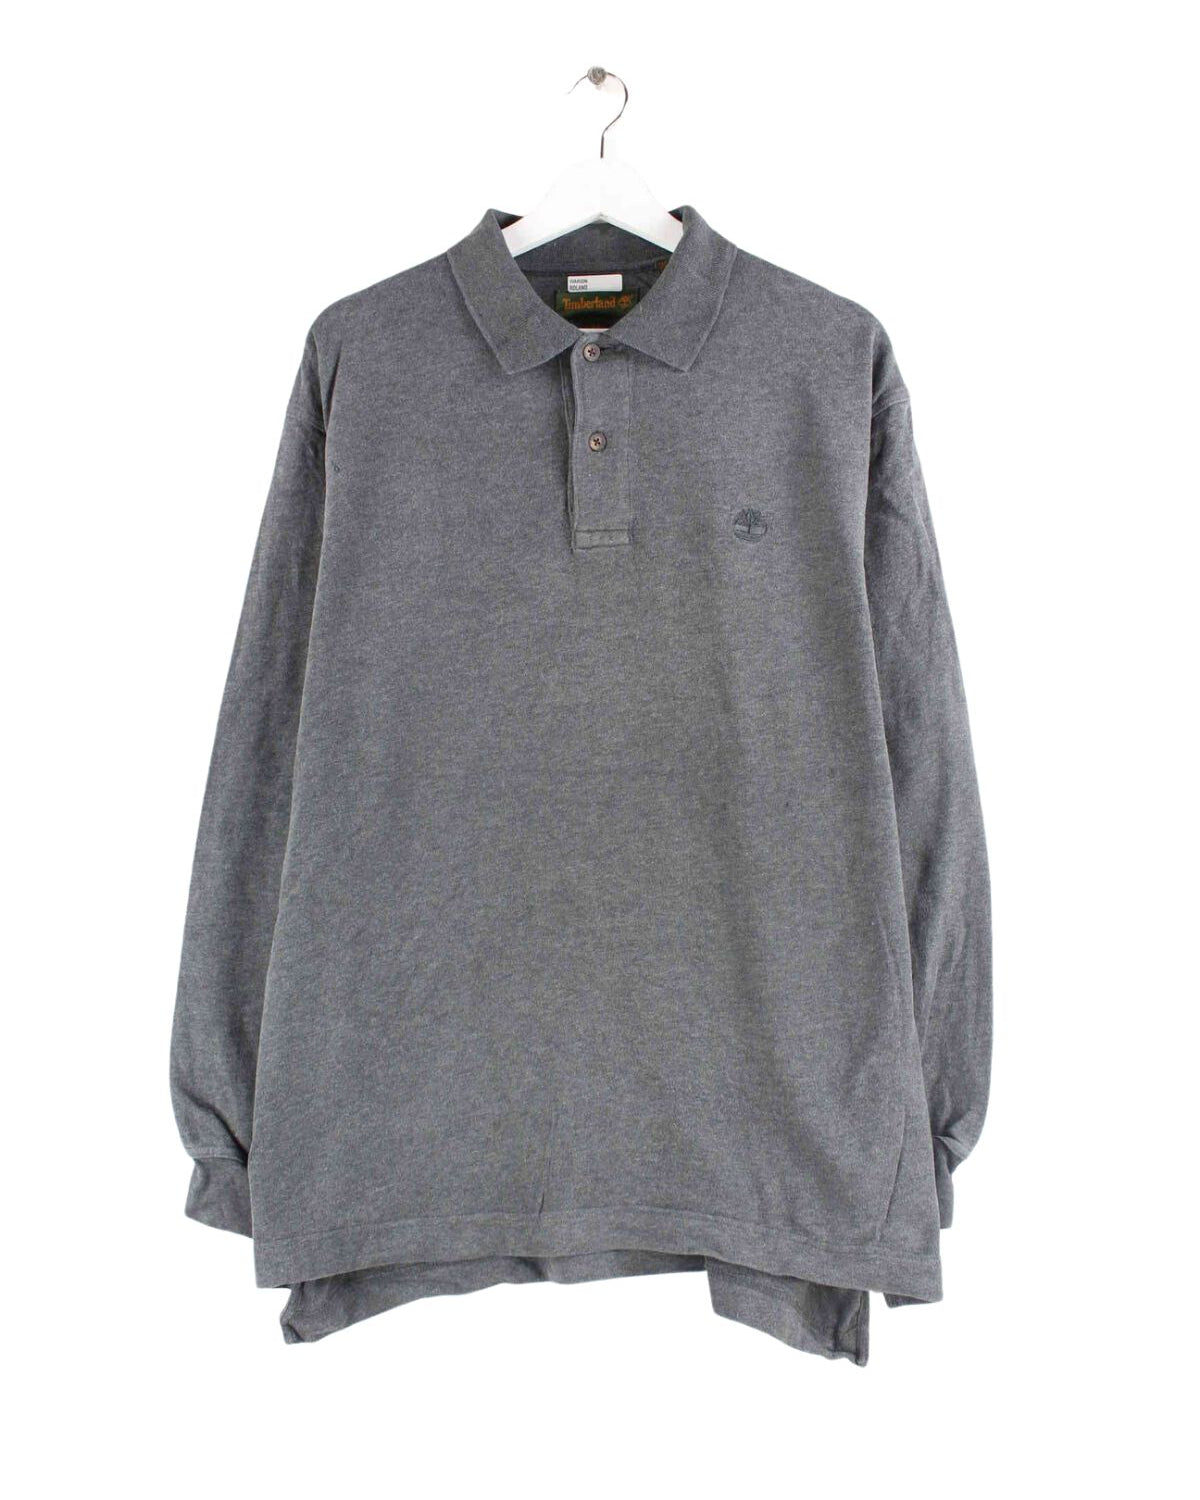 Timberland y2k Polo Sweater Grau L (front image)